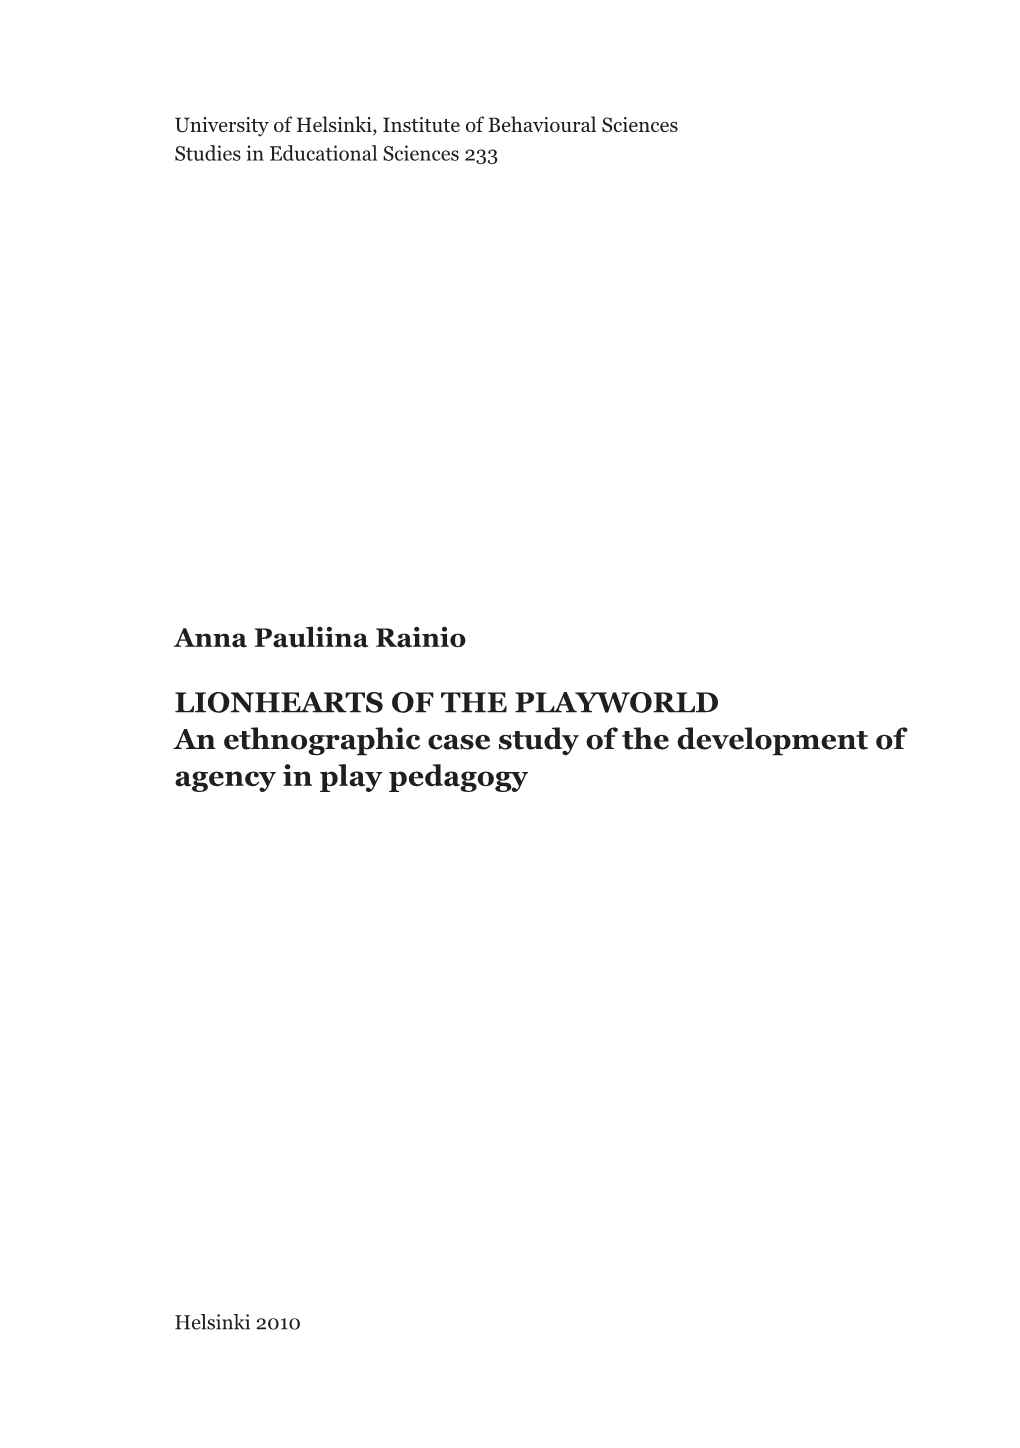 Lionhearts of the Playworld an Ethnographic Case Study of the Development of Agency in Play Pedagogy